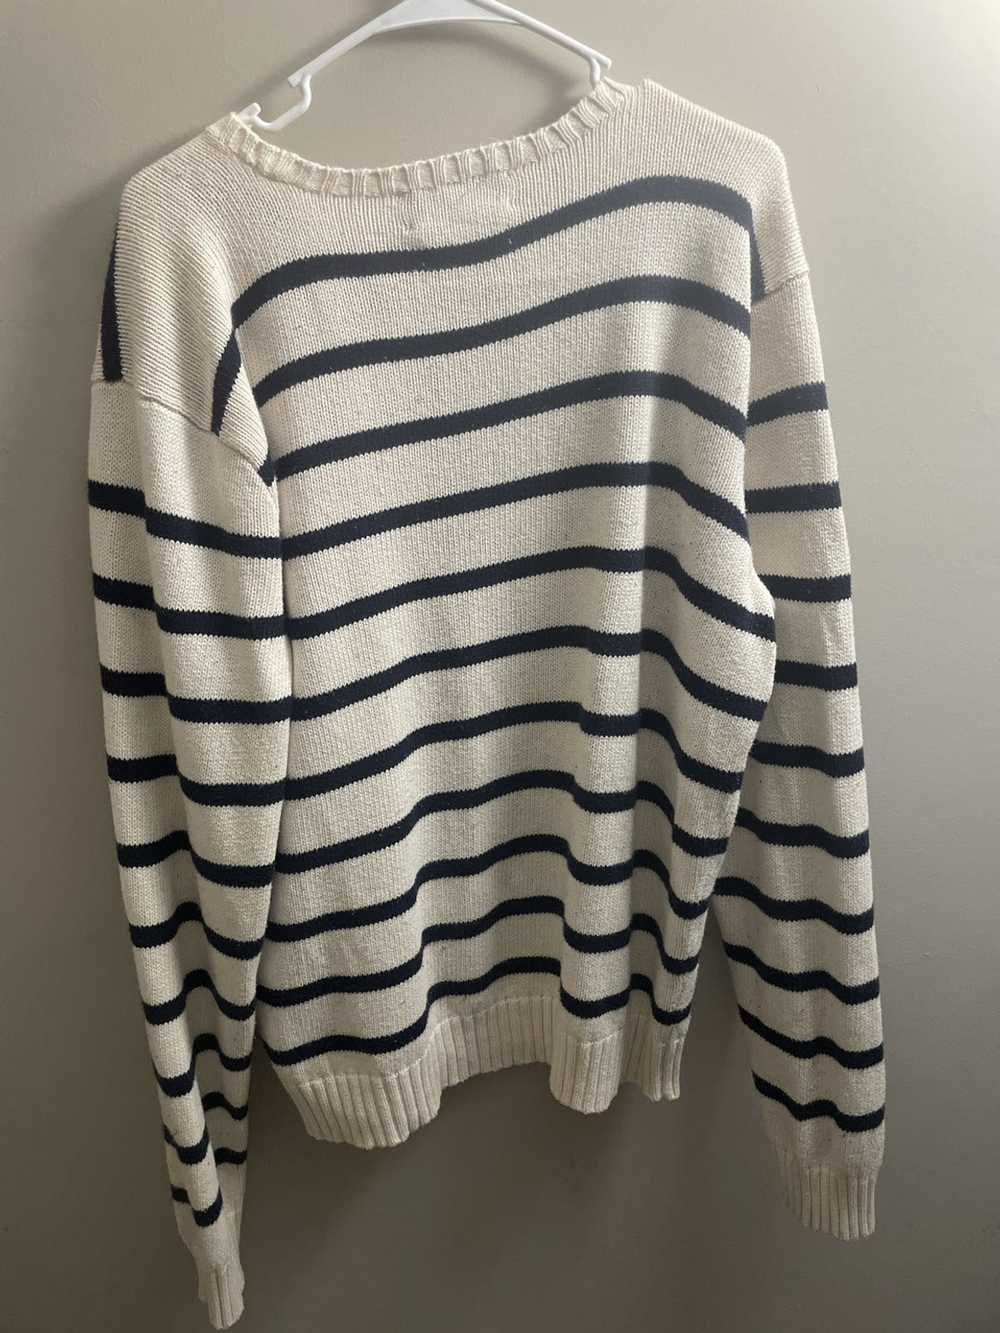 Polo Ralph Lauren Polo Knit Sweater L - image 4